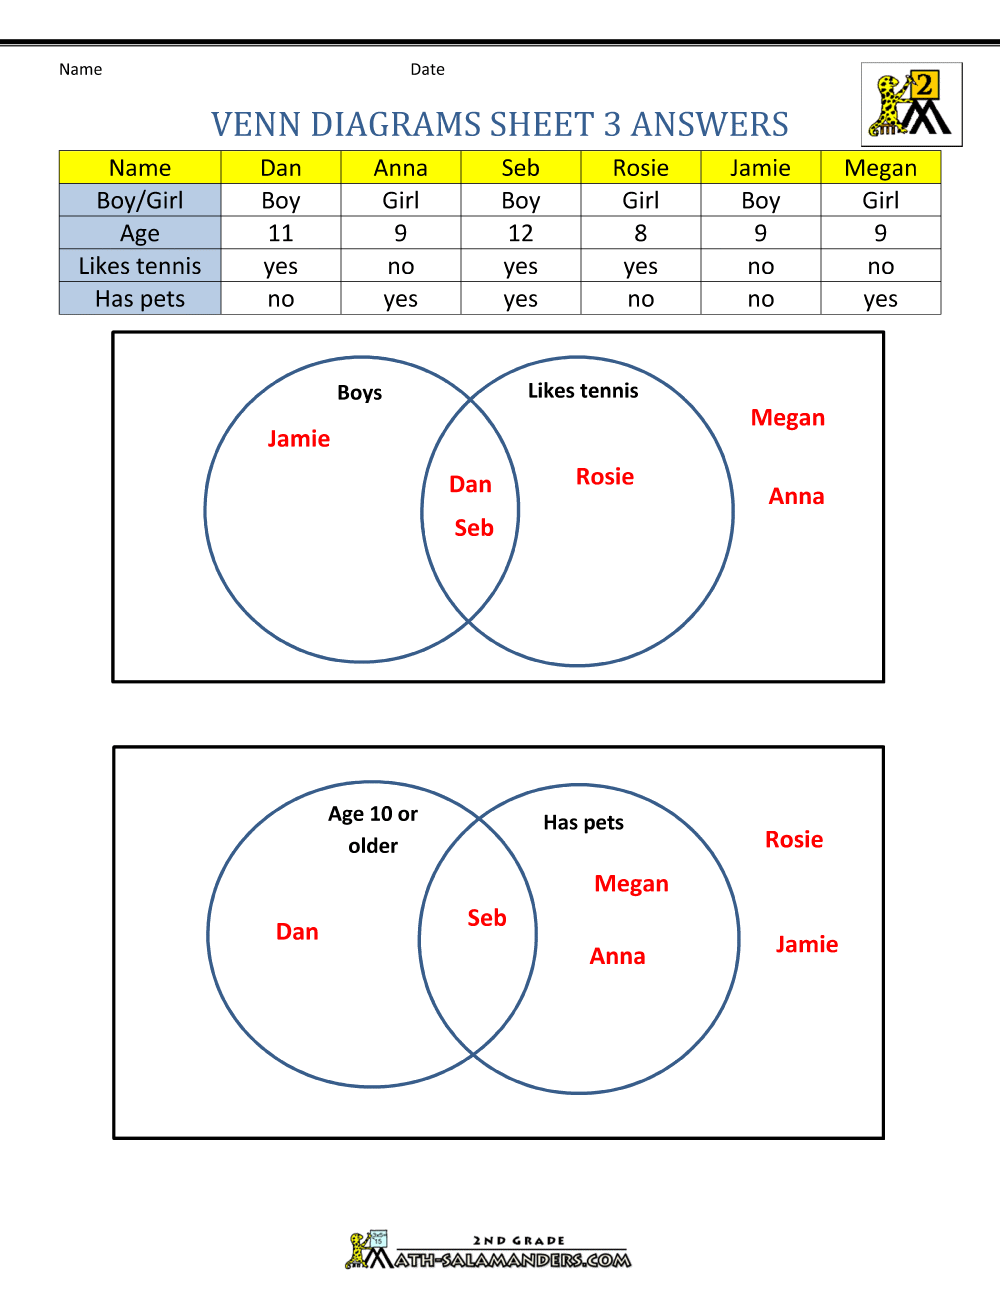 Sample Venn Diagram Worksheet Image collections - How To 